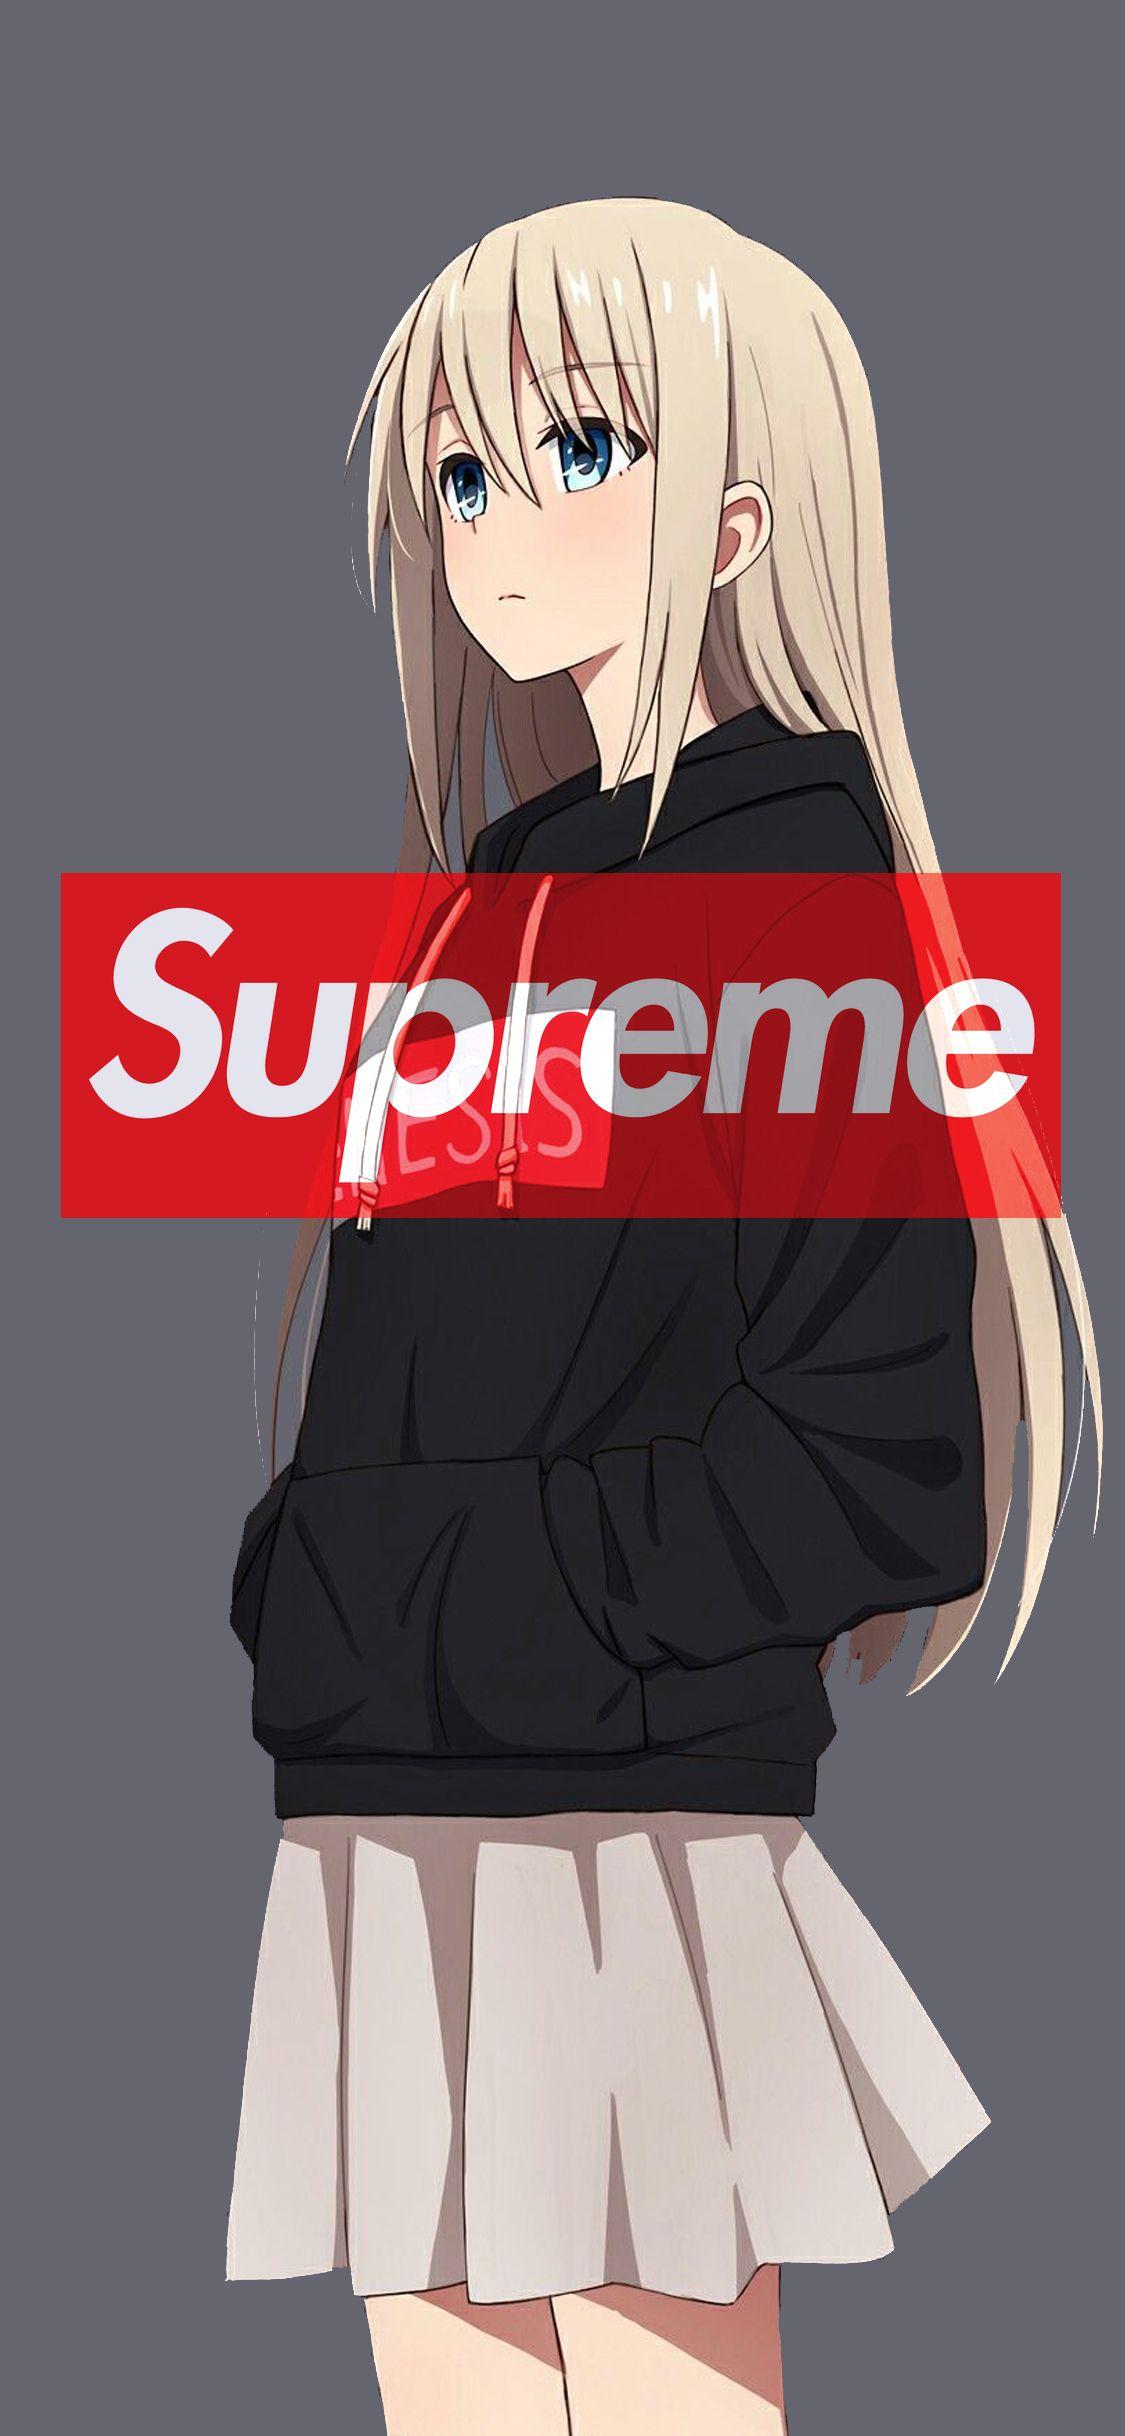 Supreme #Wallpaper #iPhone #Cool. Anime wallpaper iphone, Cool